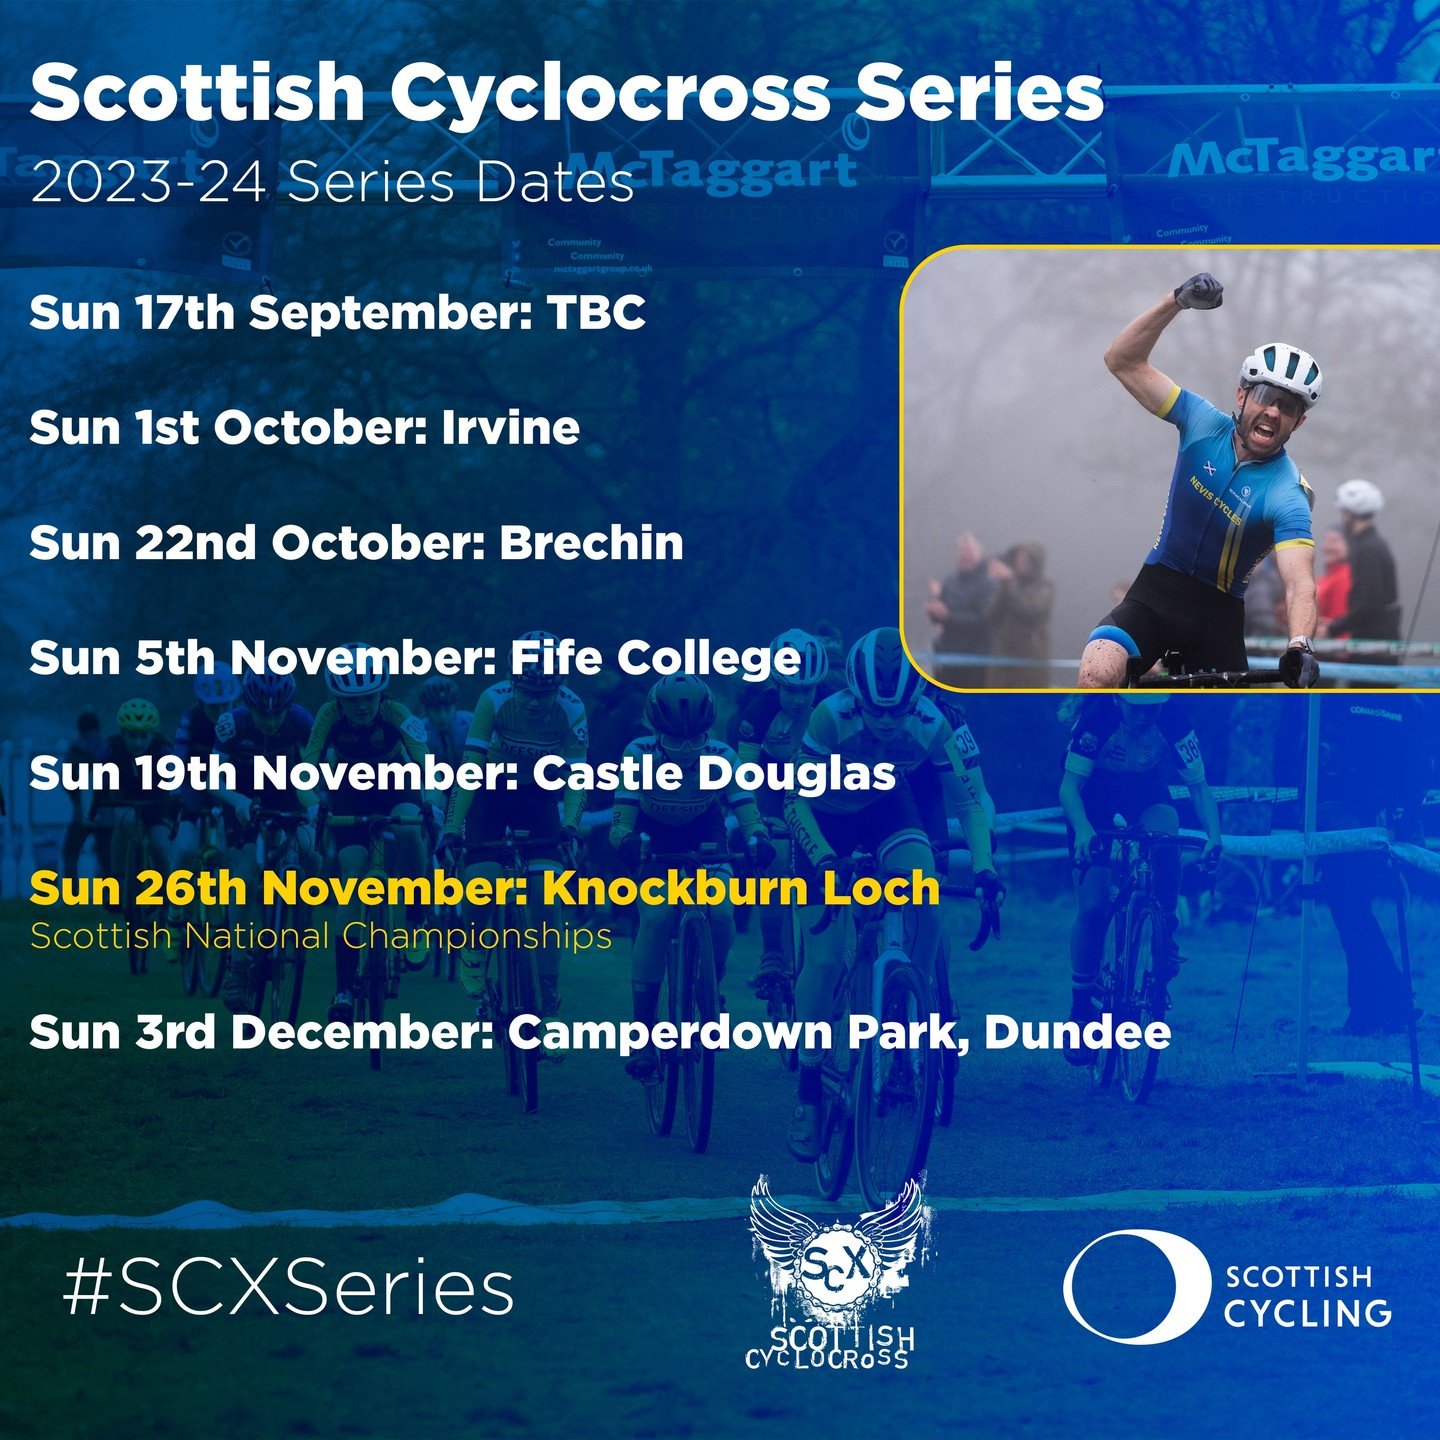 SCX are excited to unveil the SCX Series dates for the 2023/4 season. These dates deliberately avoid any clashes with the National Trophy Series giving Scottish riders the opportunity to compete at the top level in advance of the British National Cha